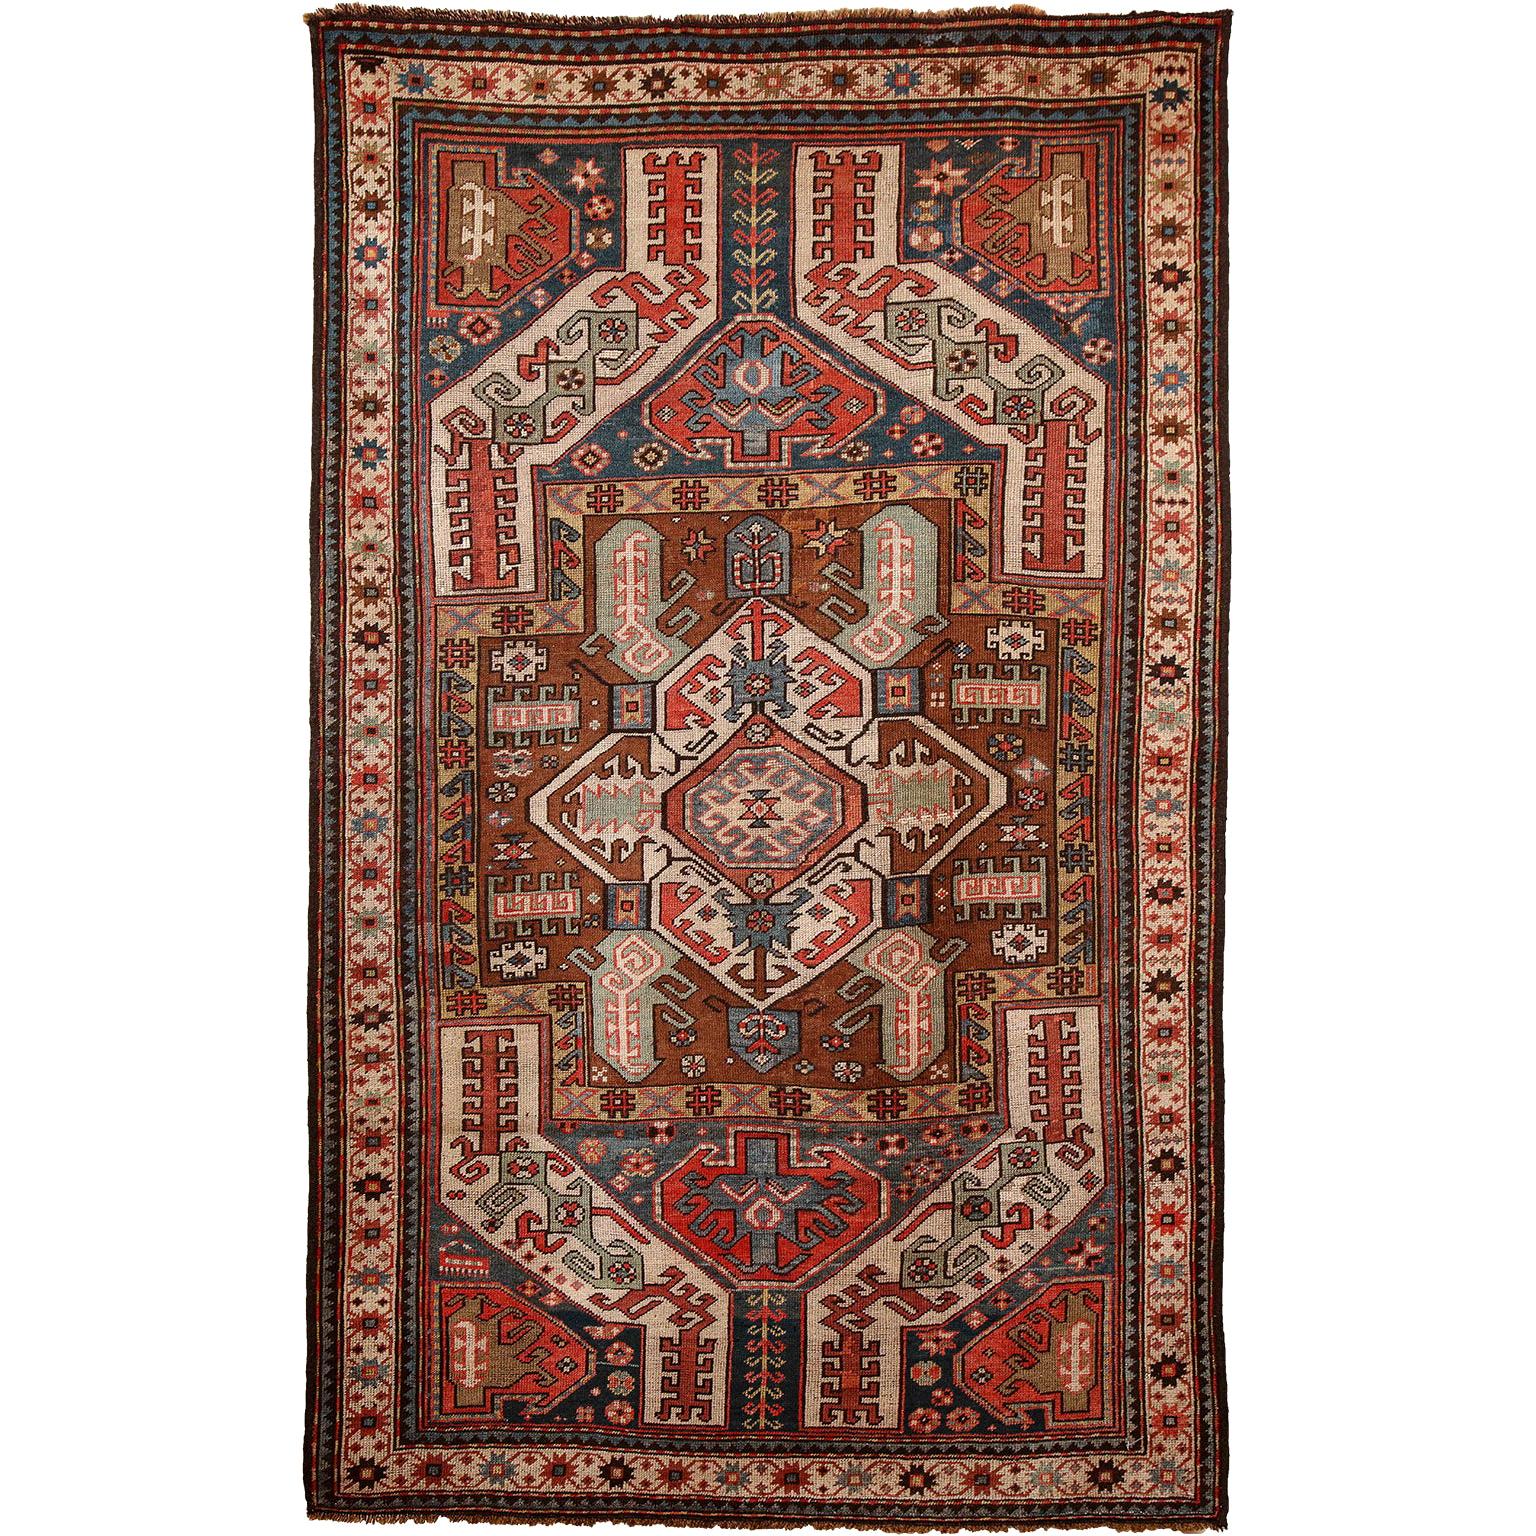 Antique 1880s Caucasian Rug, Hand-knotted Wool, Blue, Green, Red, 4' x 6' For Sale